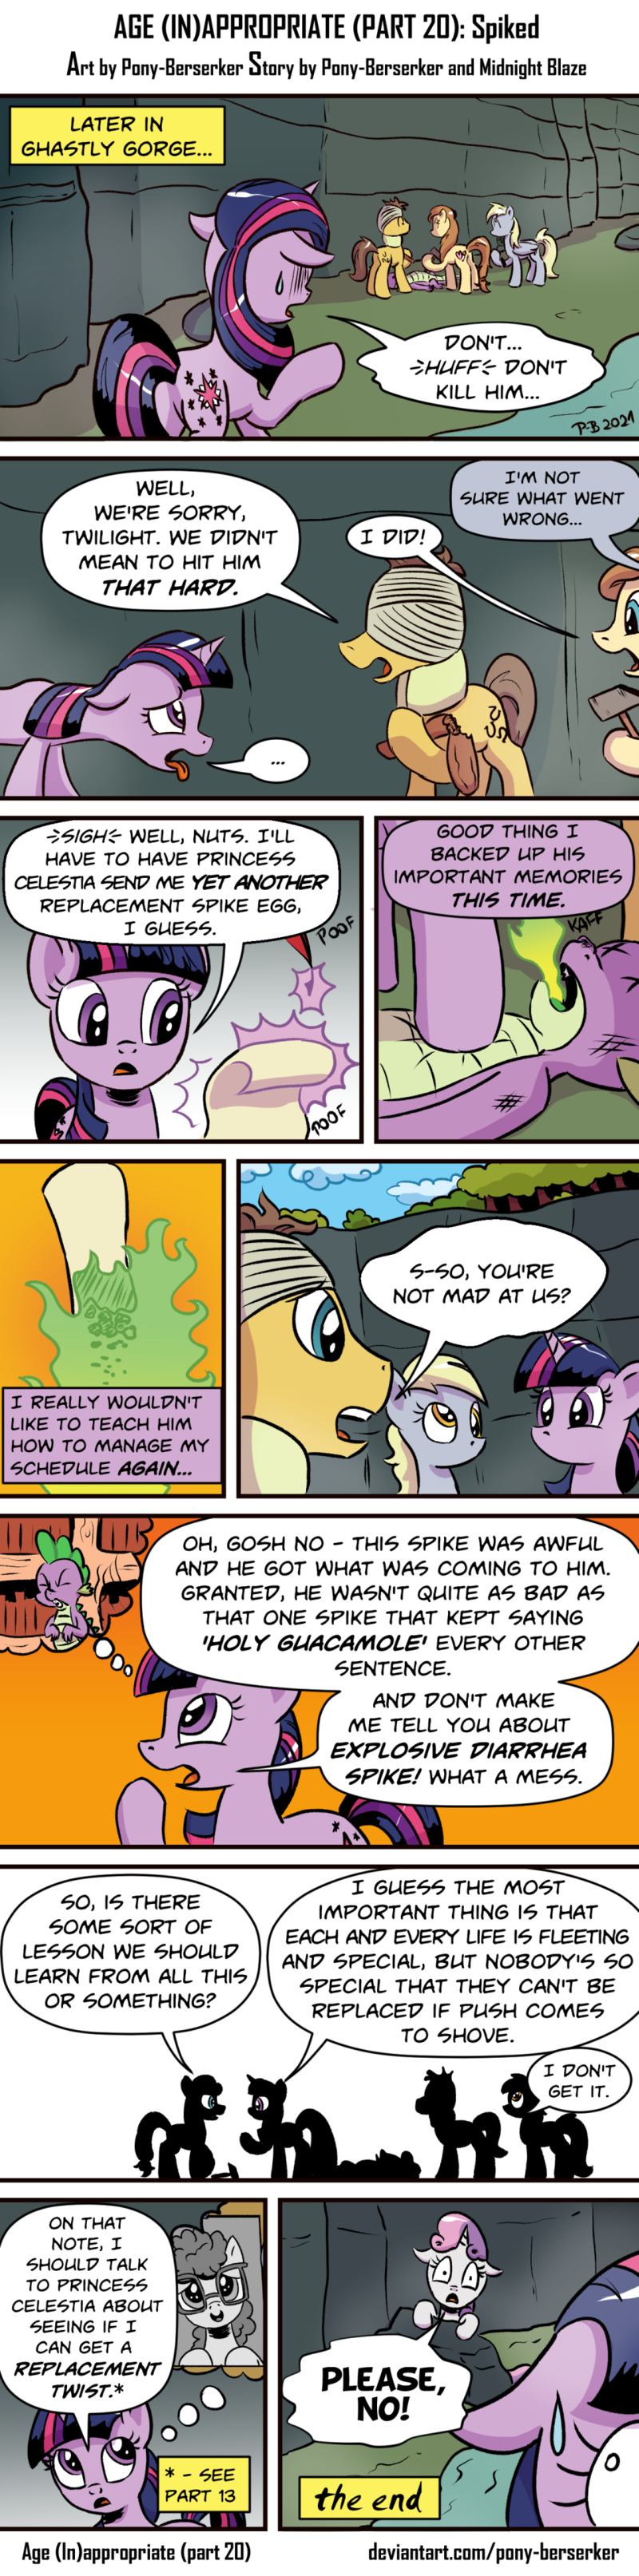 Page 20: Spiked